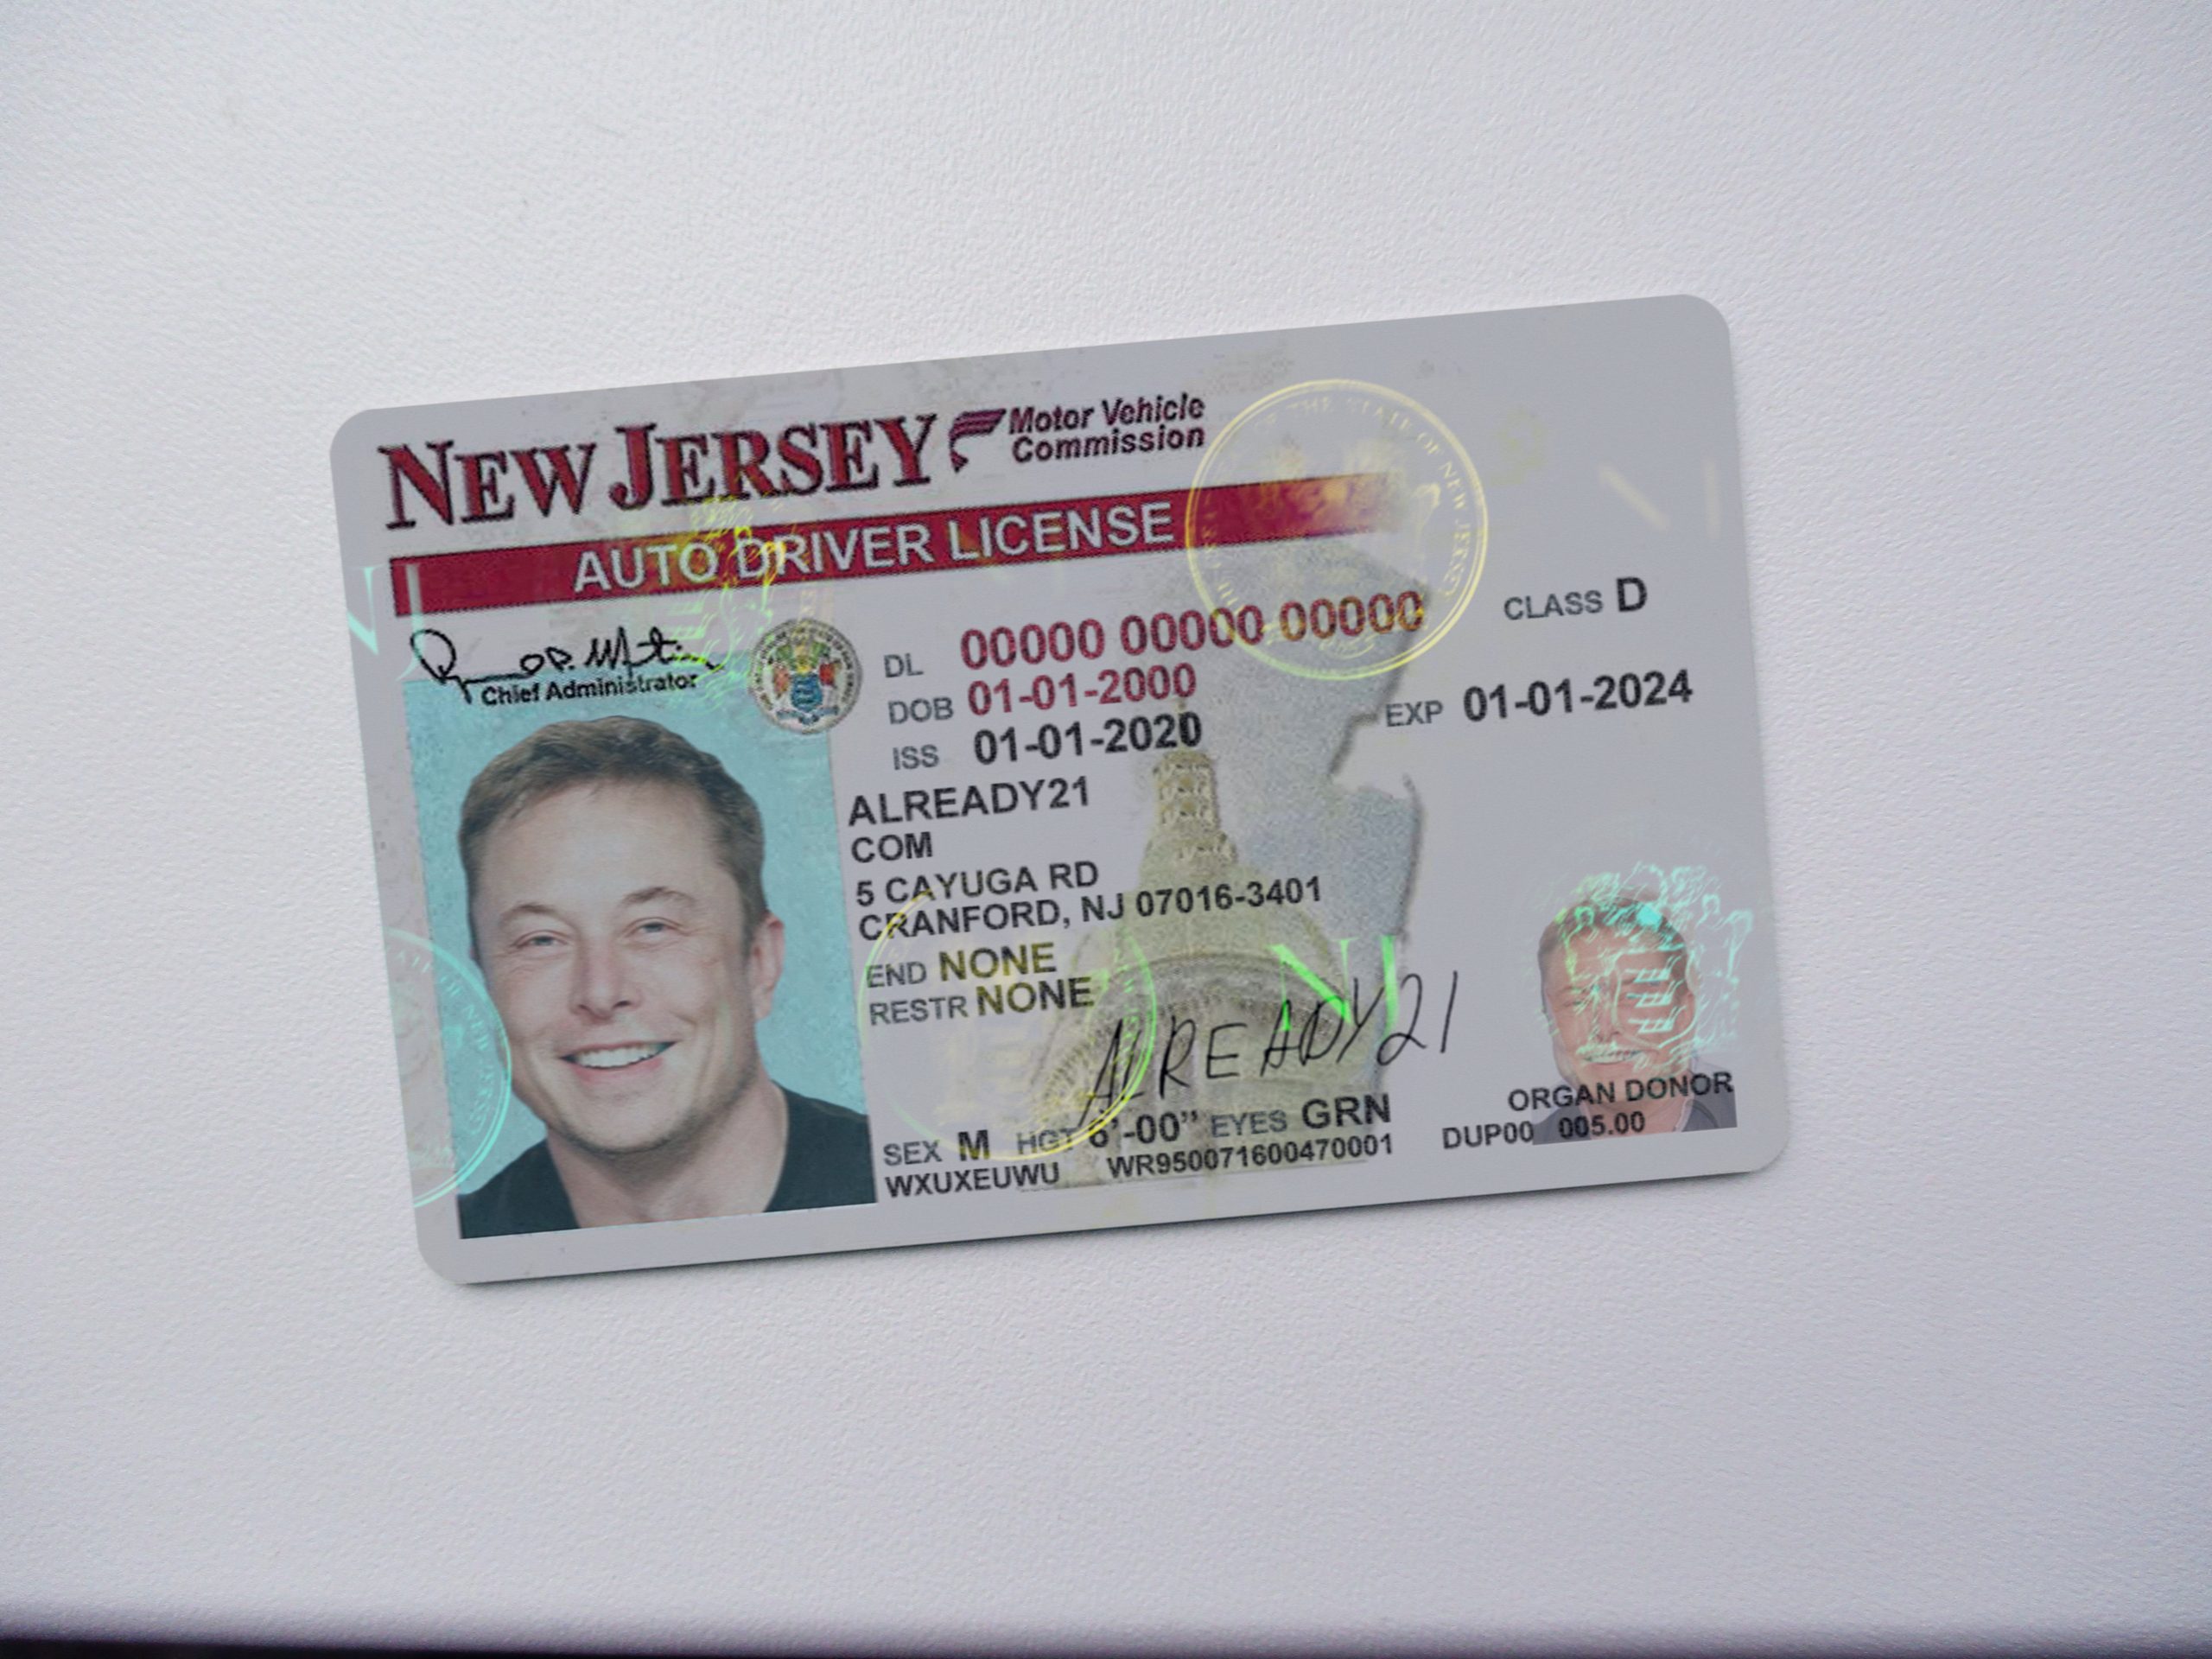 Jersey Shore Vinnie NEW JERSEY NJ Drivers License fake id card Seaside Heights 